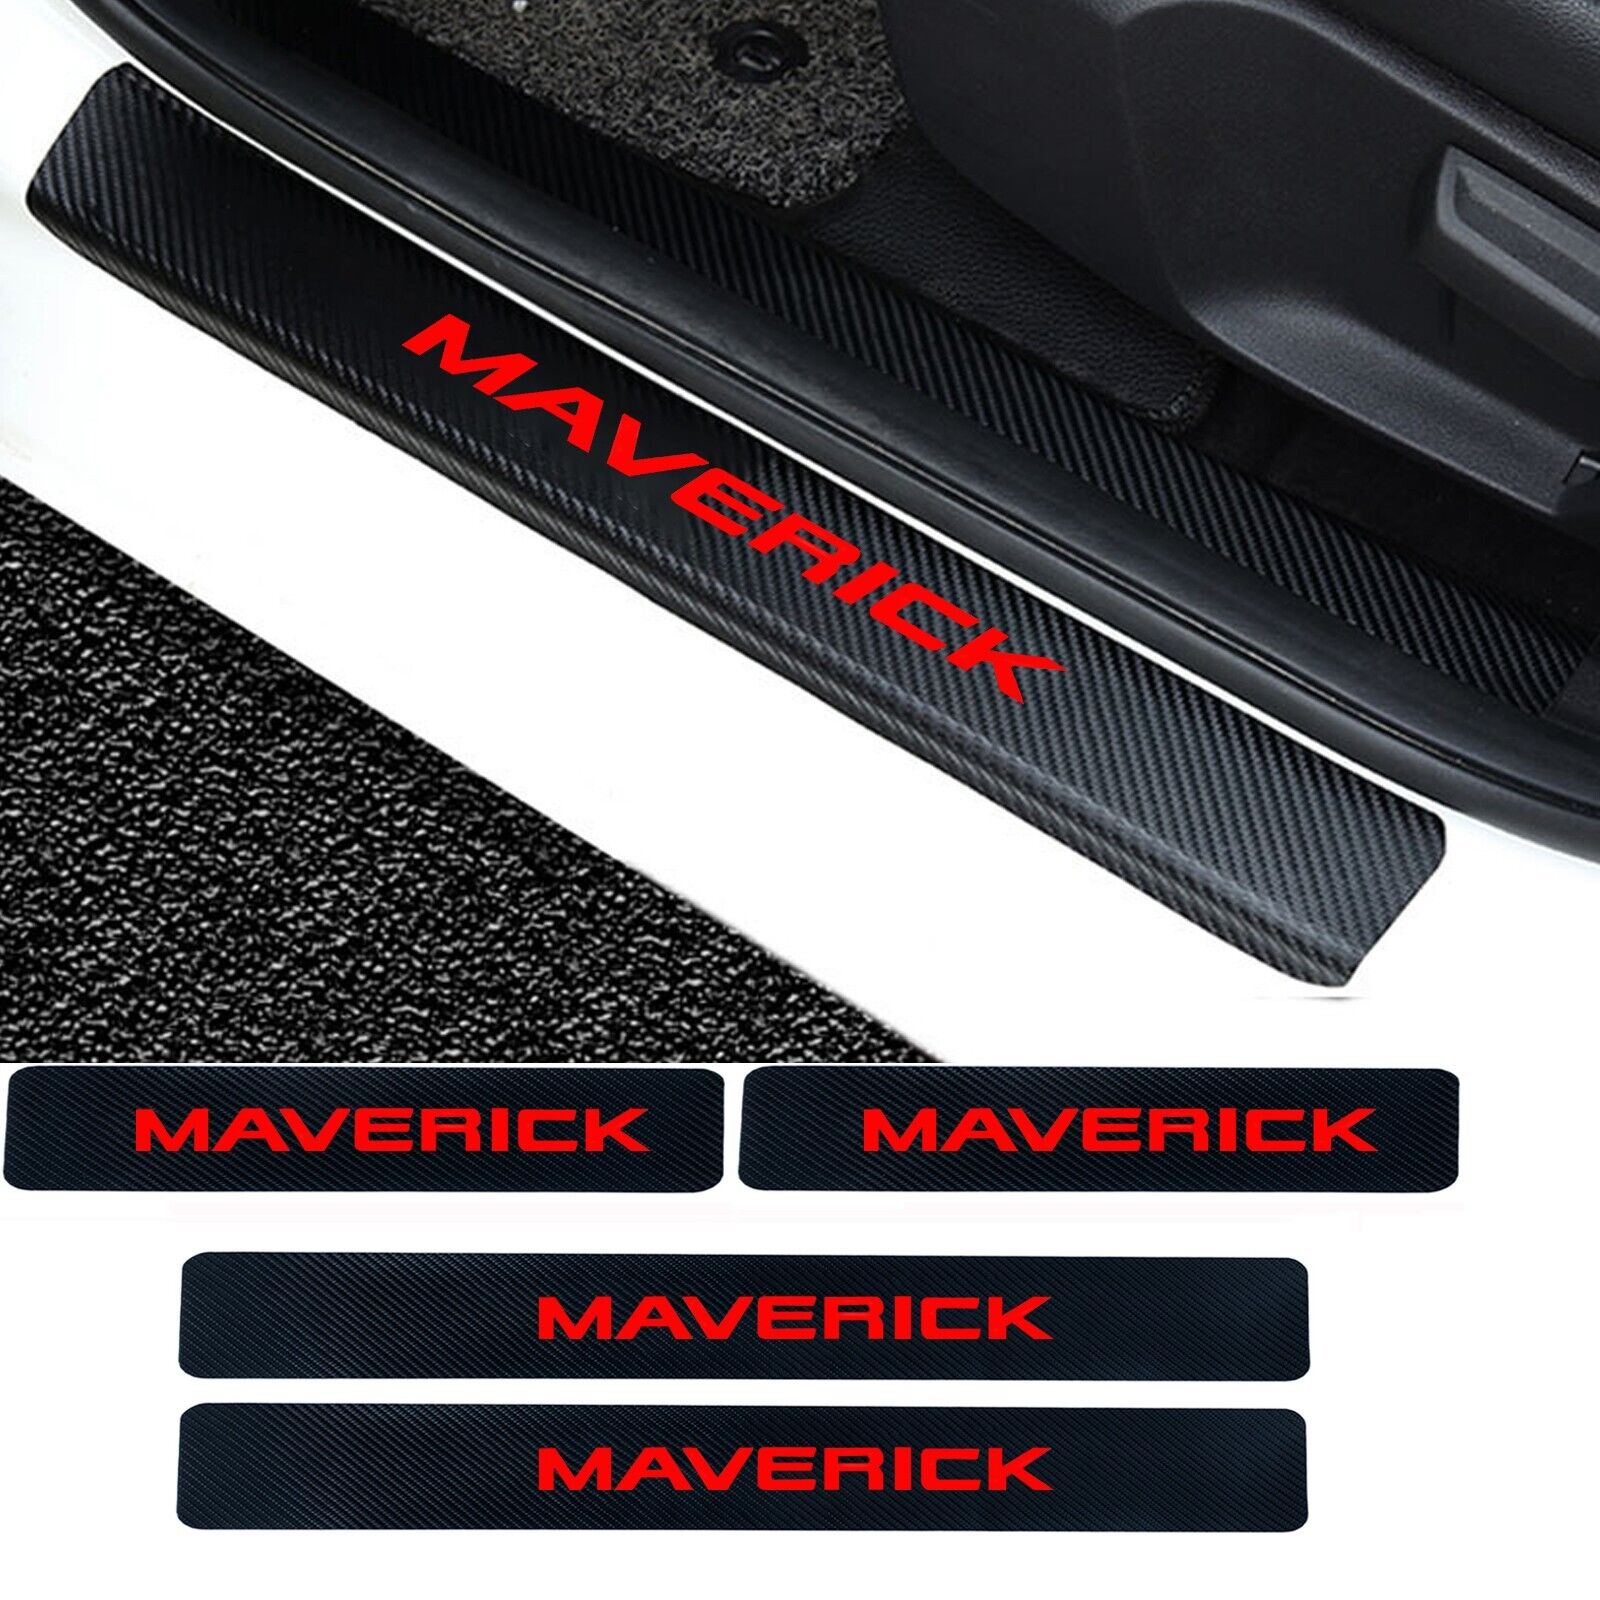 Car Door Sill Protector Carbon Fiber Leather Sticker for Ford Maverick 2022 2023